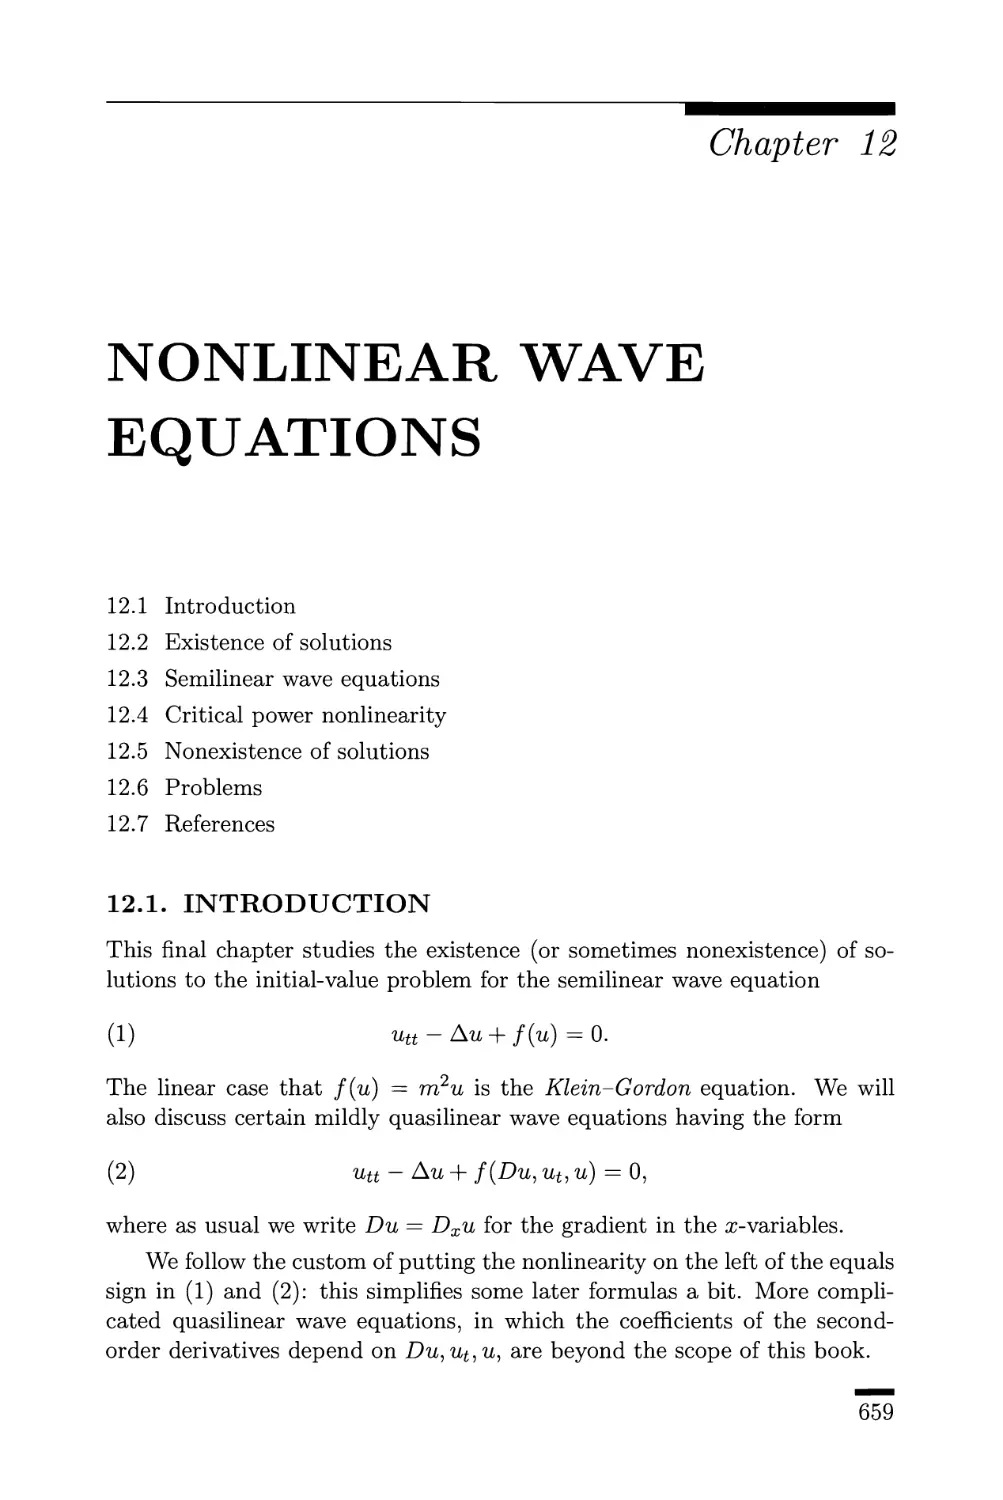 12. Nonlinear Wave Equations